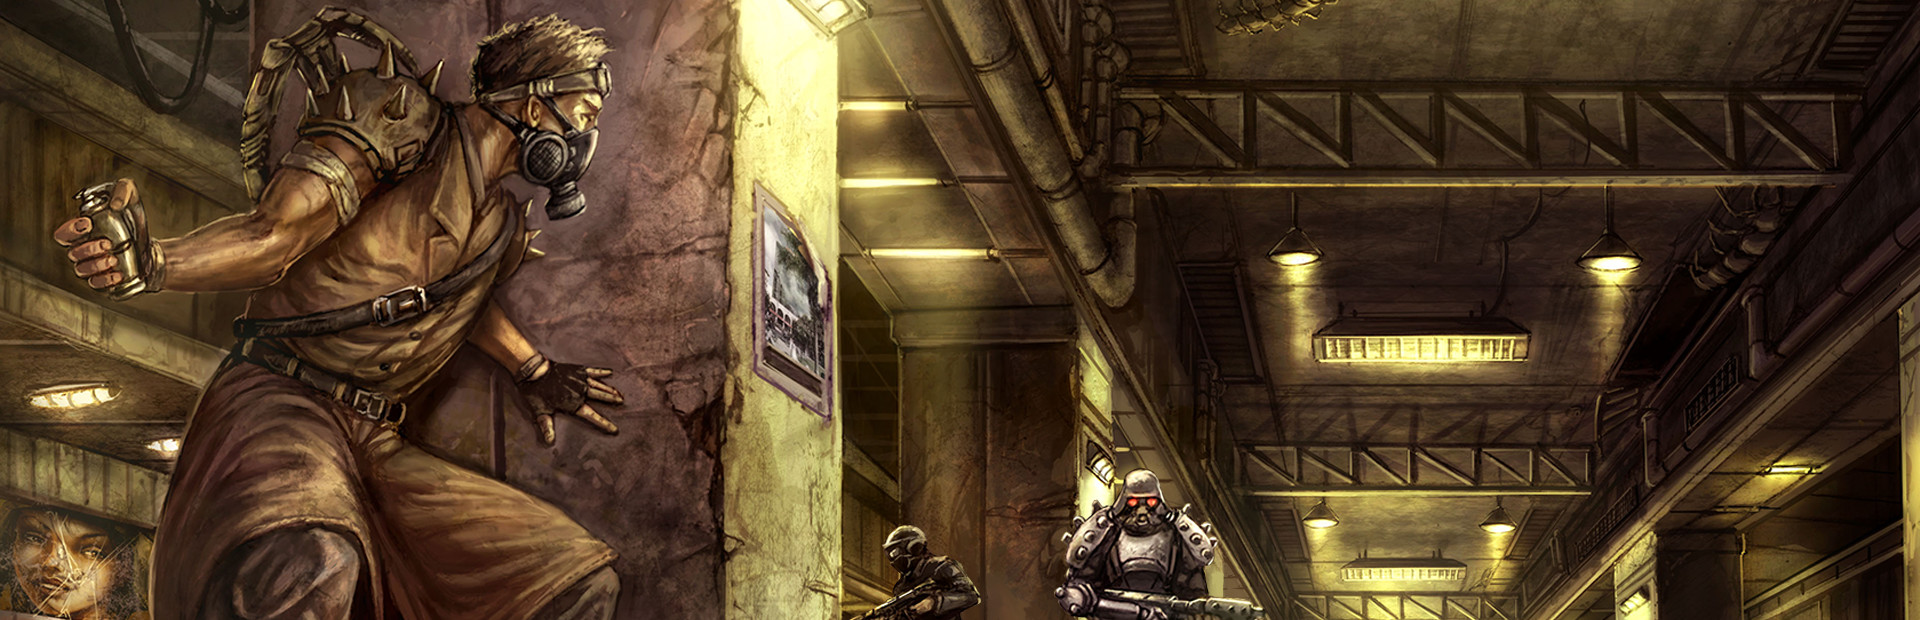 UnderRail cover image